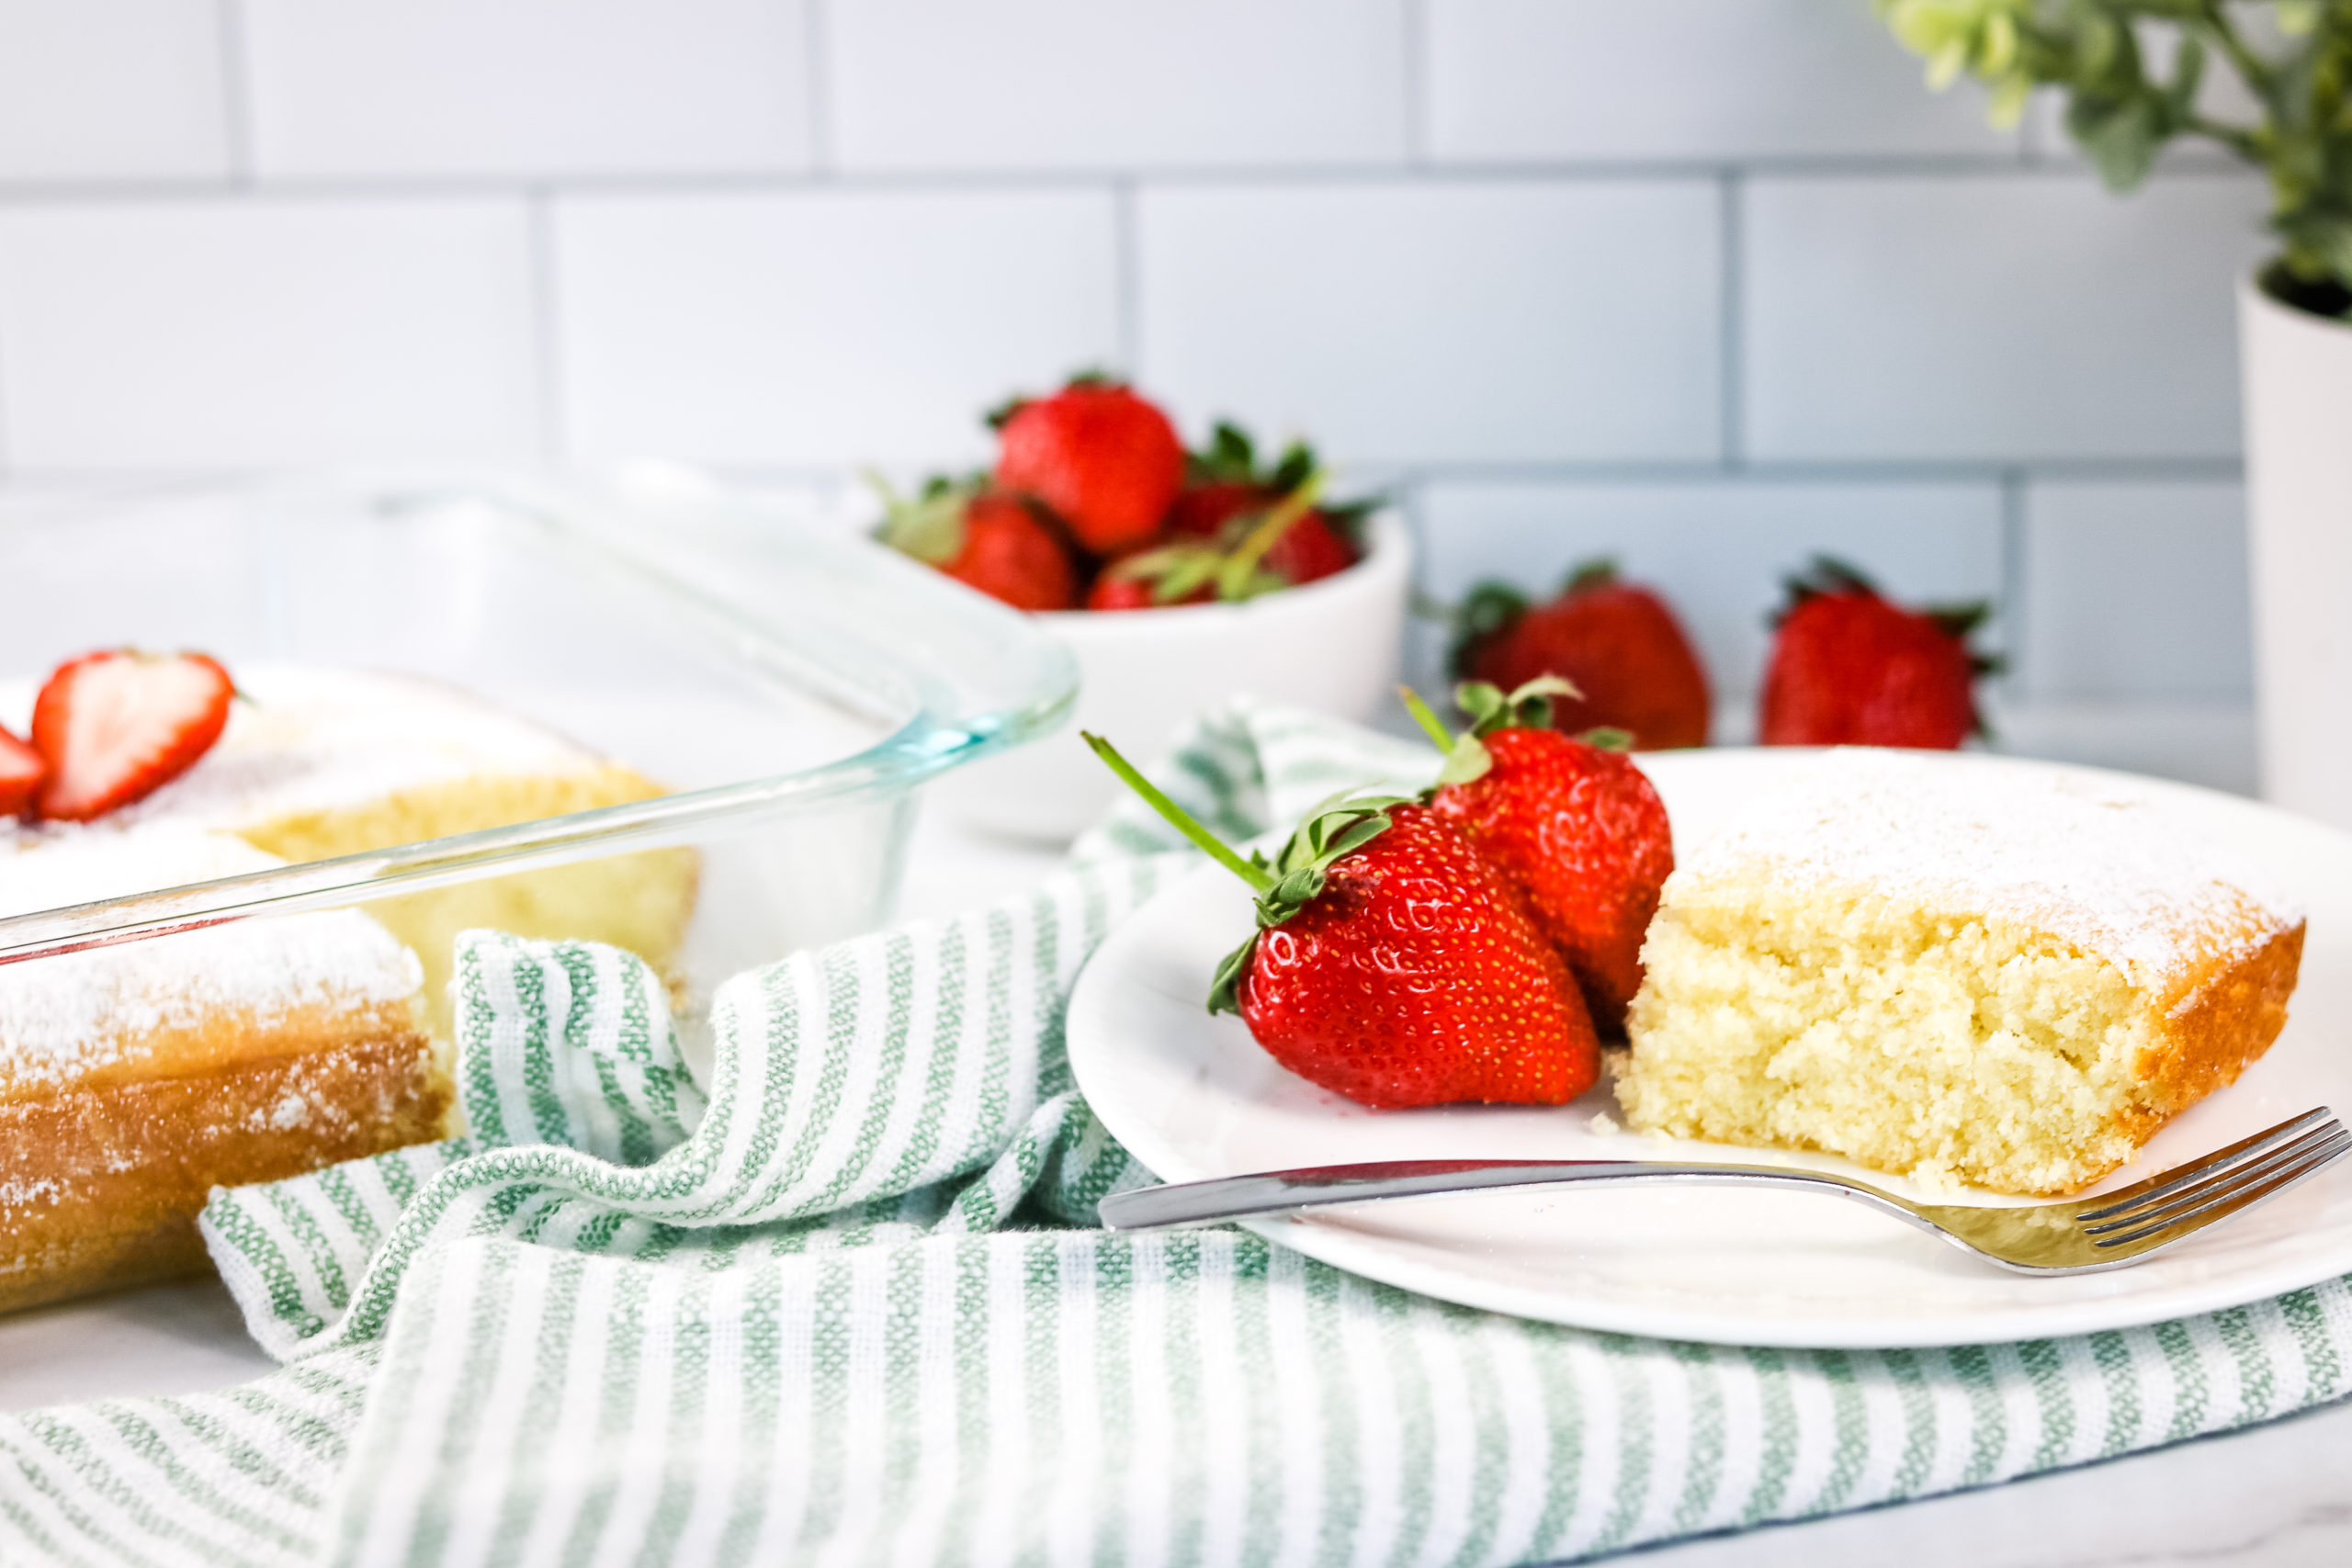 Lazy Cake with a bowl of strawberries.